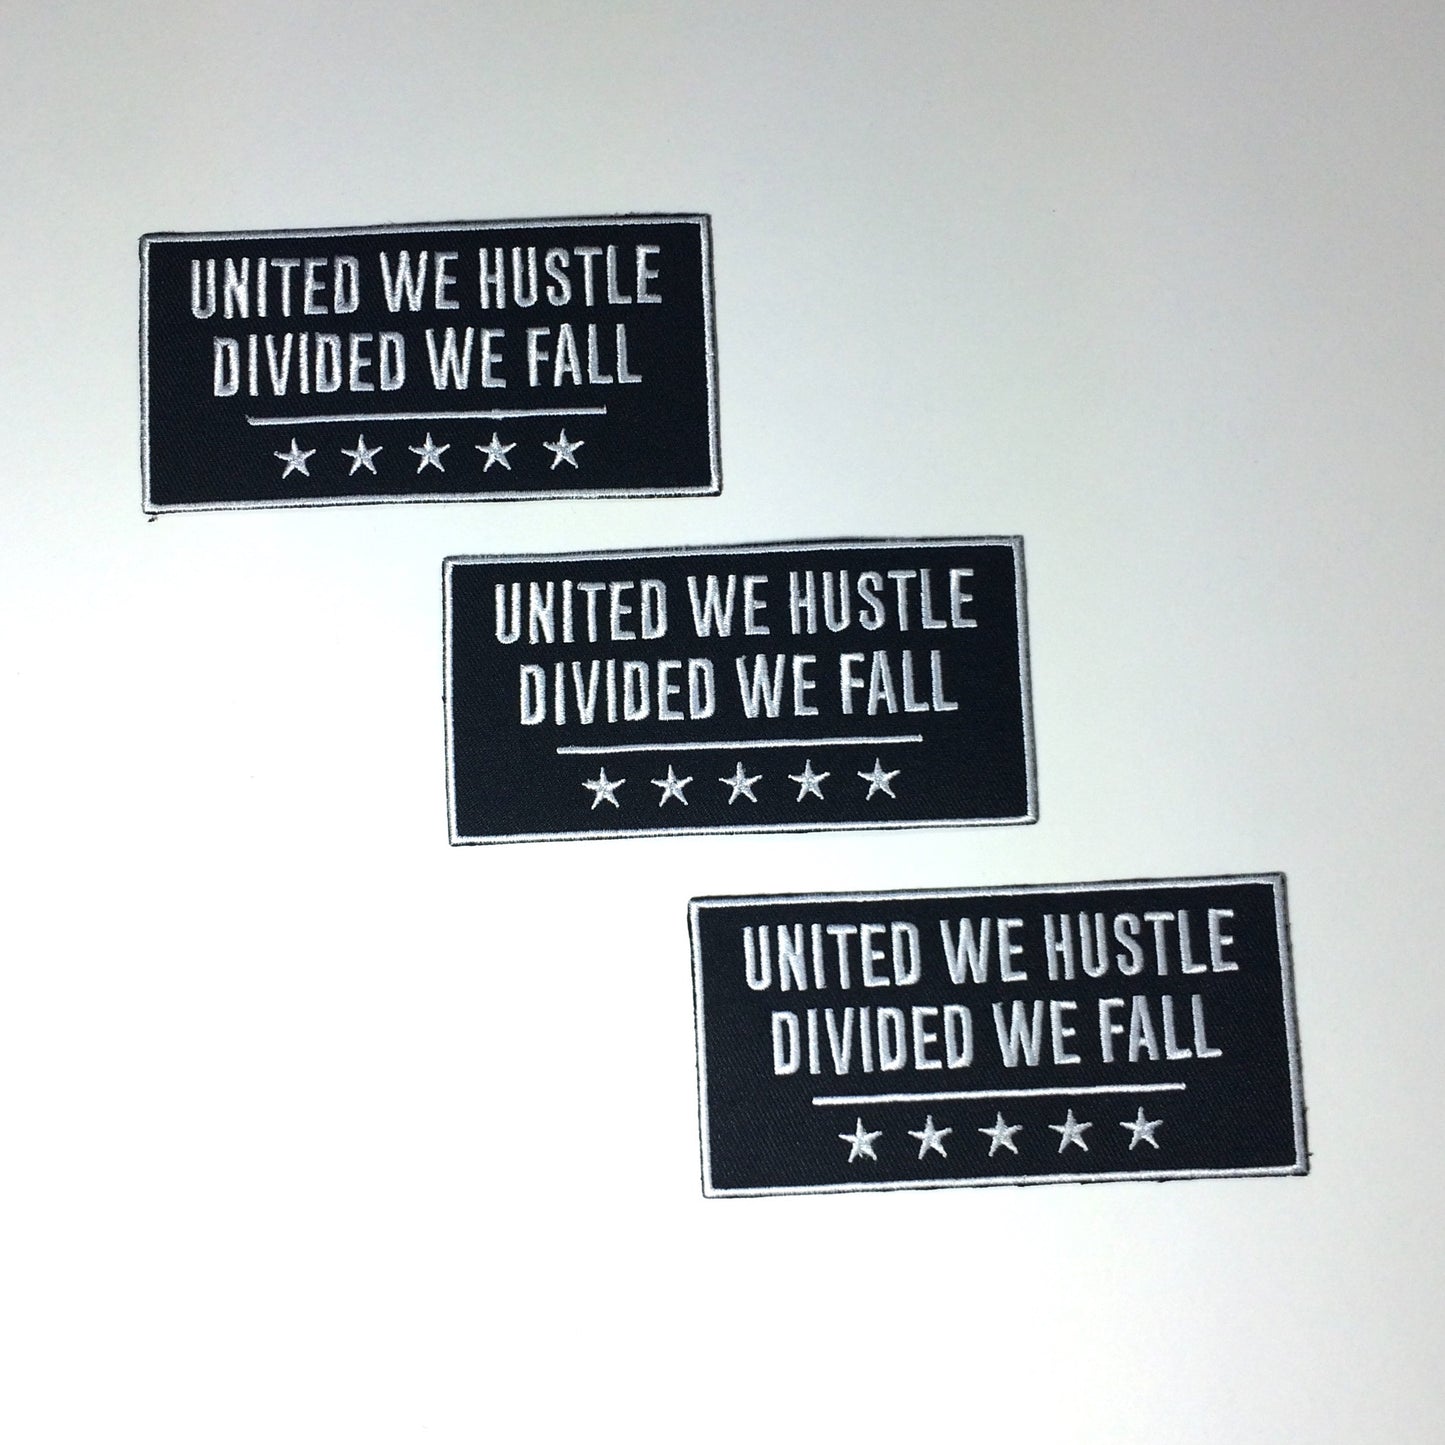 United We Hustle•Divided We Fall 2 X 4 inch Motivational Patch